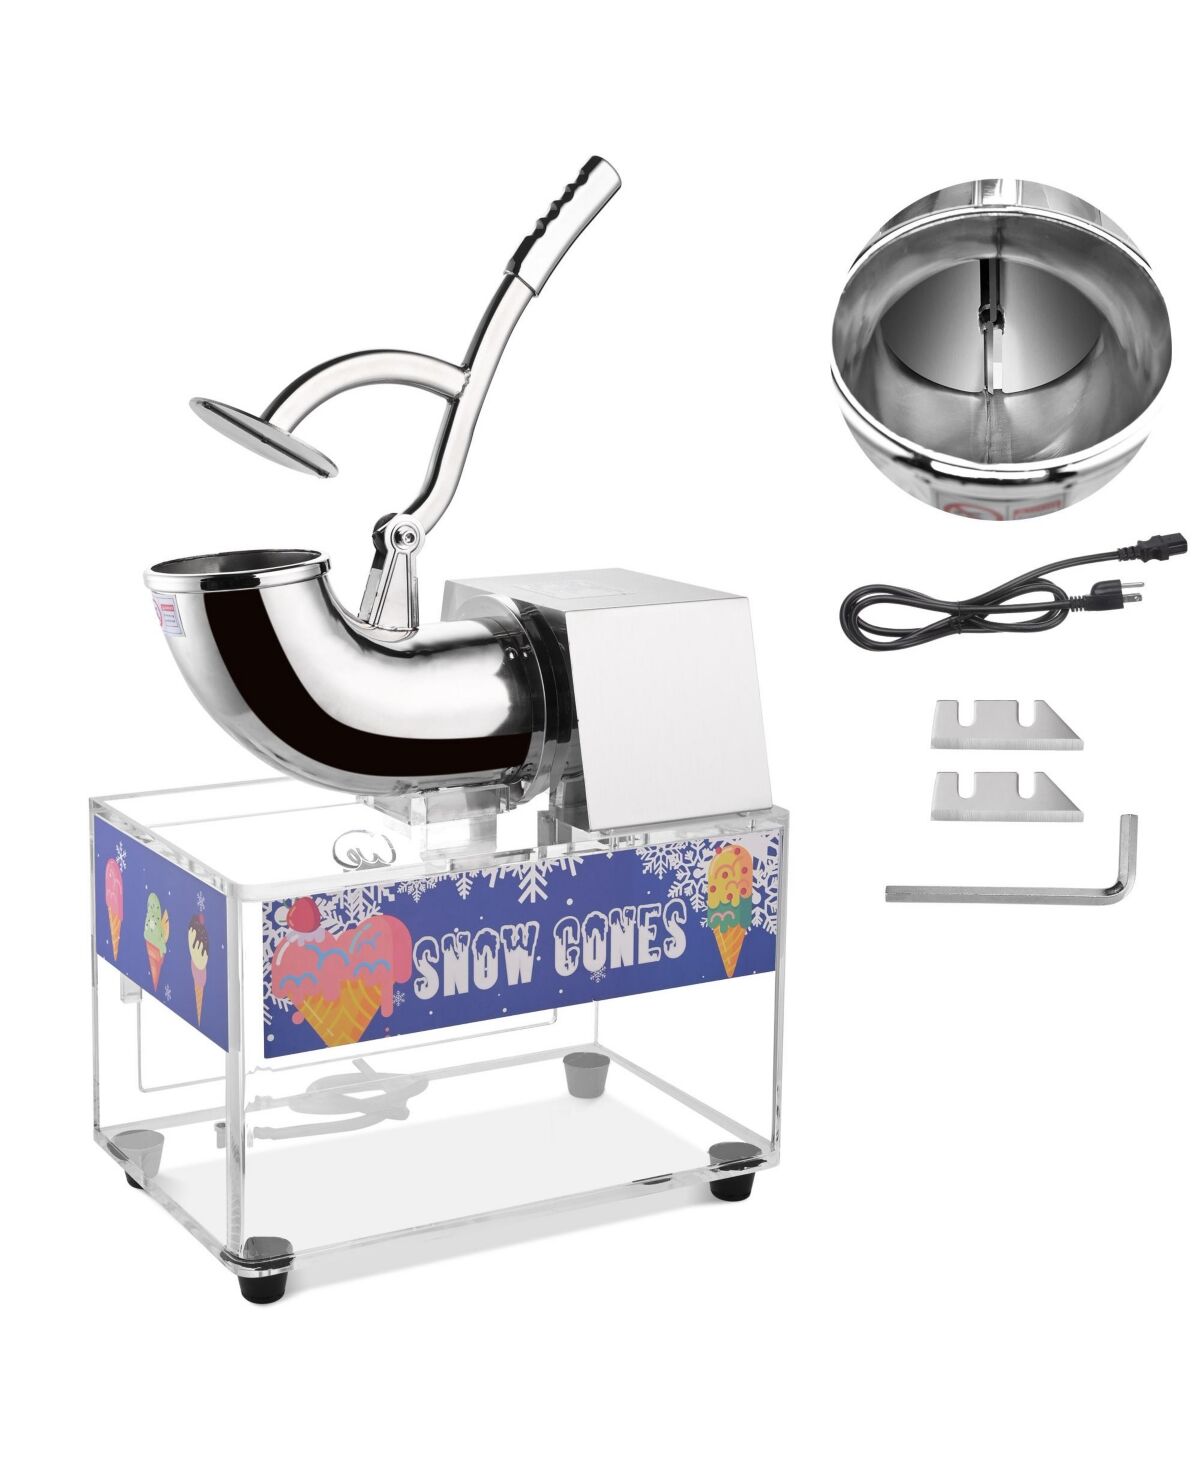 Yescom We Chef Electric Snow Cone Machine Maker Stainless Steel Ice Shaver Crusher Home - Silver